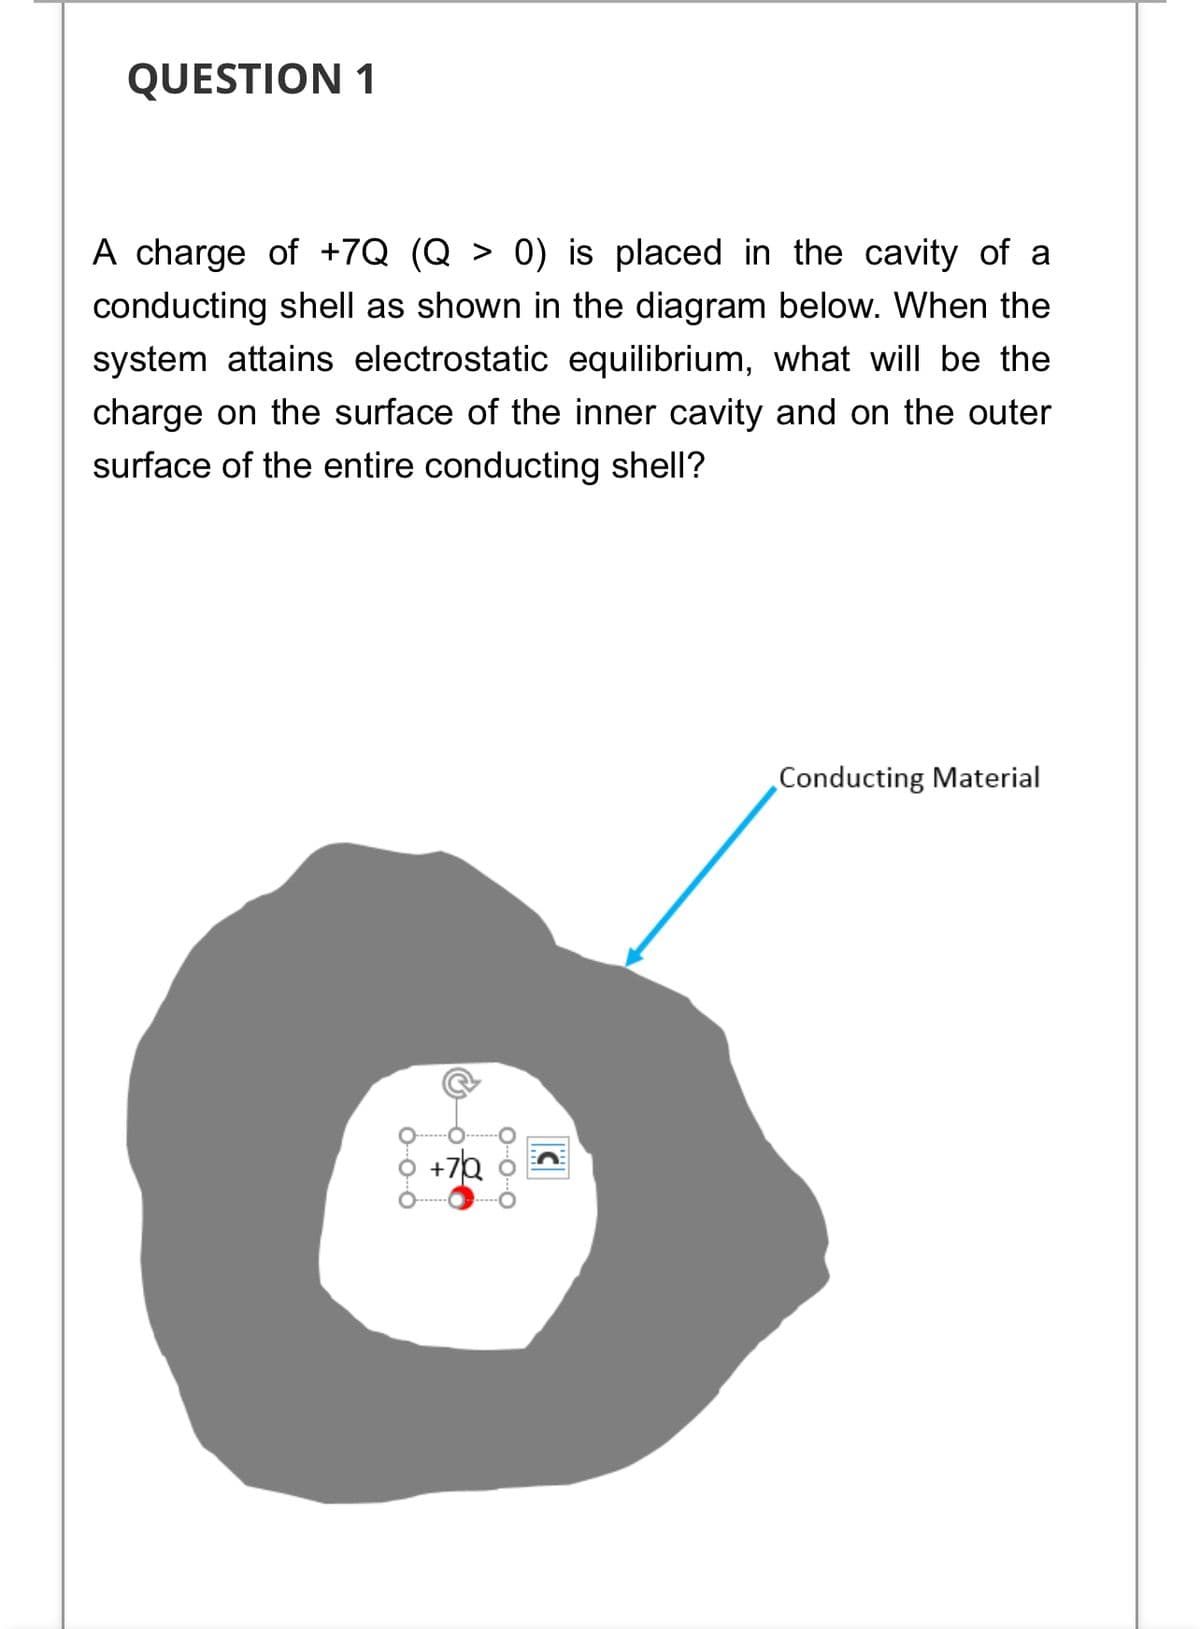 QUESTION 1
A charge of +7Q (Q > 0) is placed in the cavity of a
conducting shell as shown in the diagram below. When the
system attains electrostatic equilibrium, what will be the
charge on the surface of the inner cavity and on the outer
surface of the entire conducting shell?
Conducting Material
O-O-O
6-o-0
